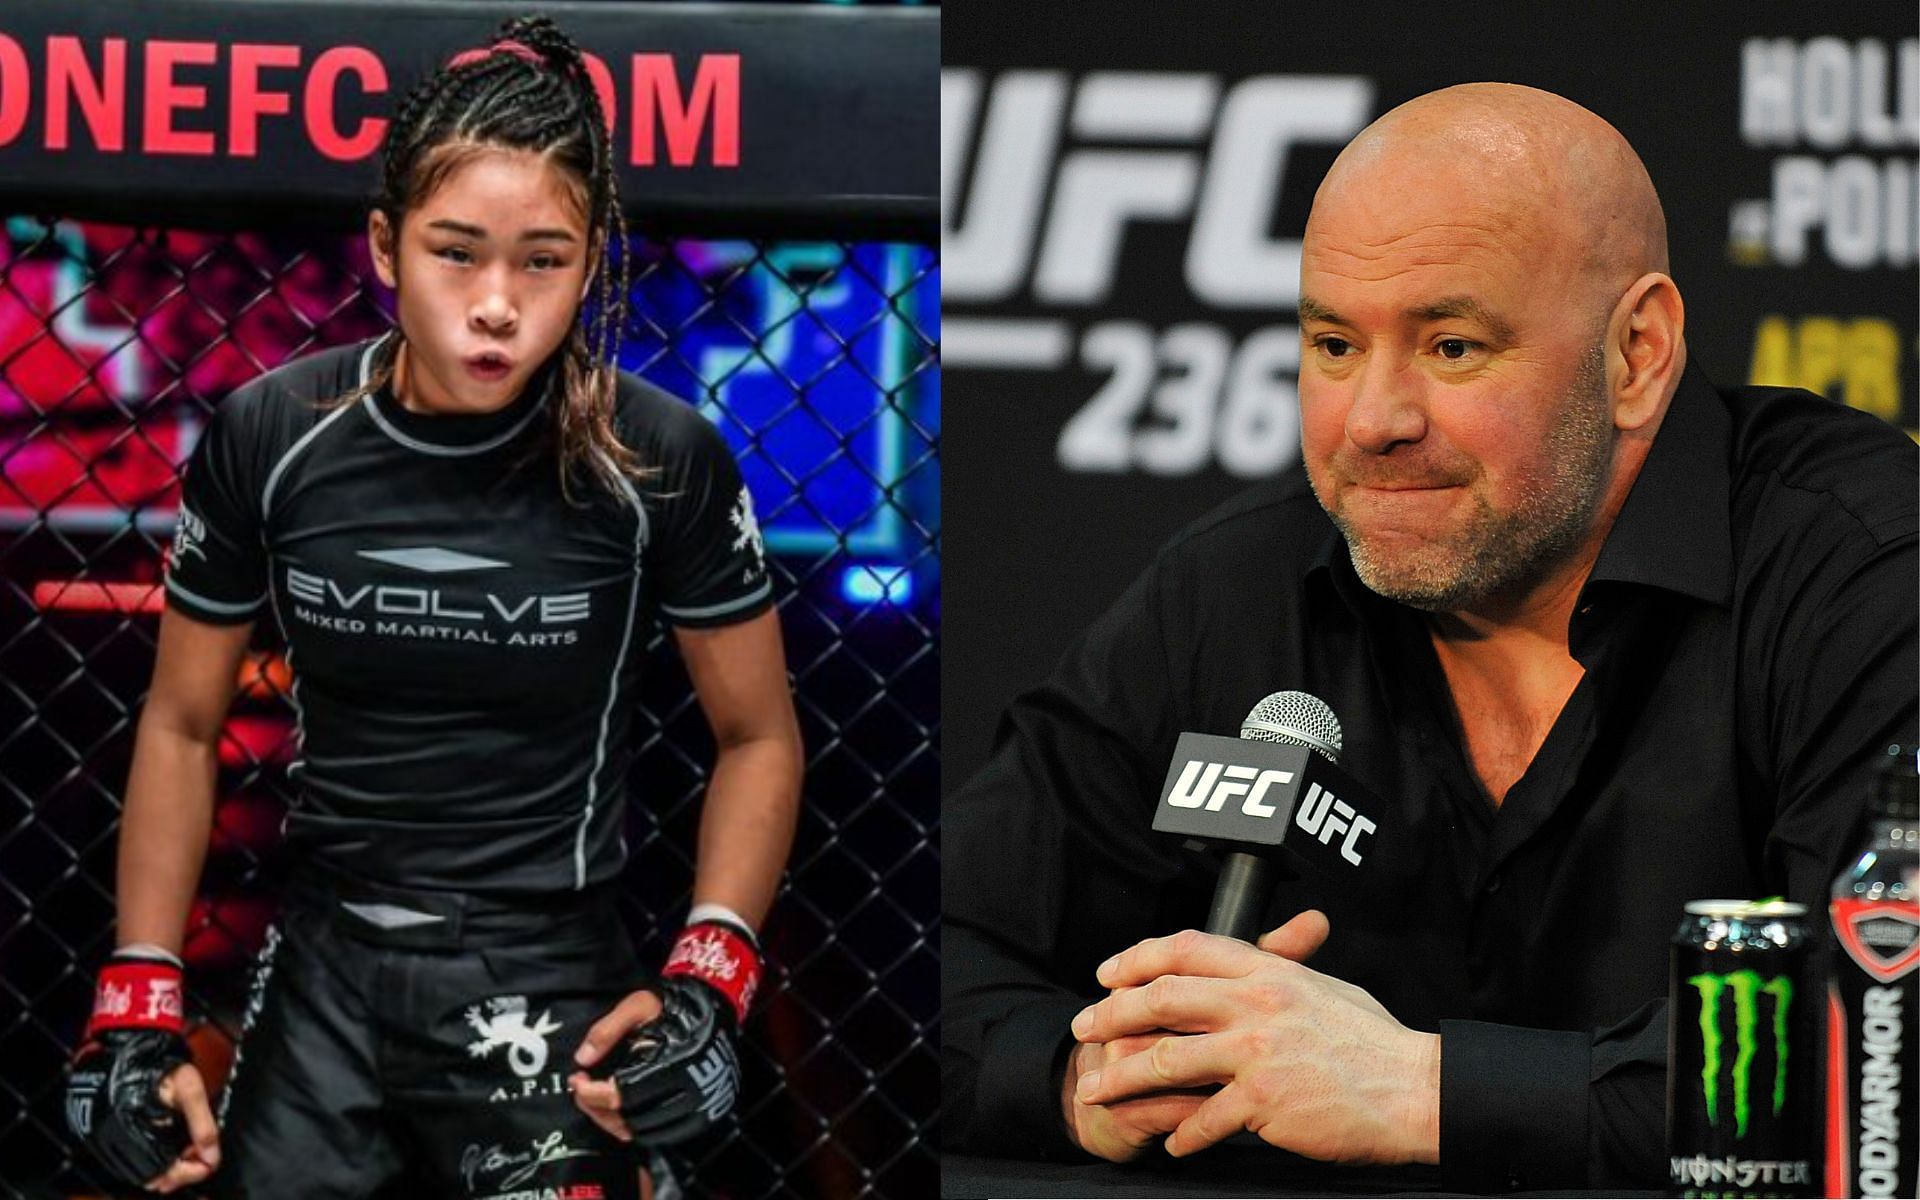 Victoria Lee (left) and Dana White (right). [Images courtesy: left from Instagram @victorialee.mma and right from Getty Images]